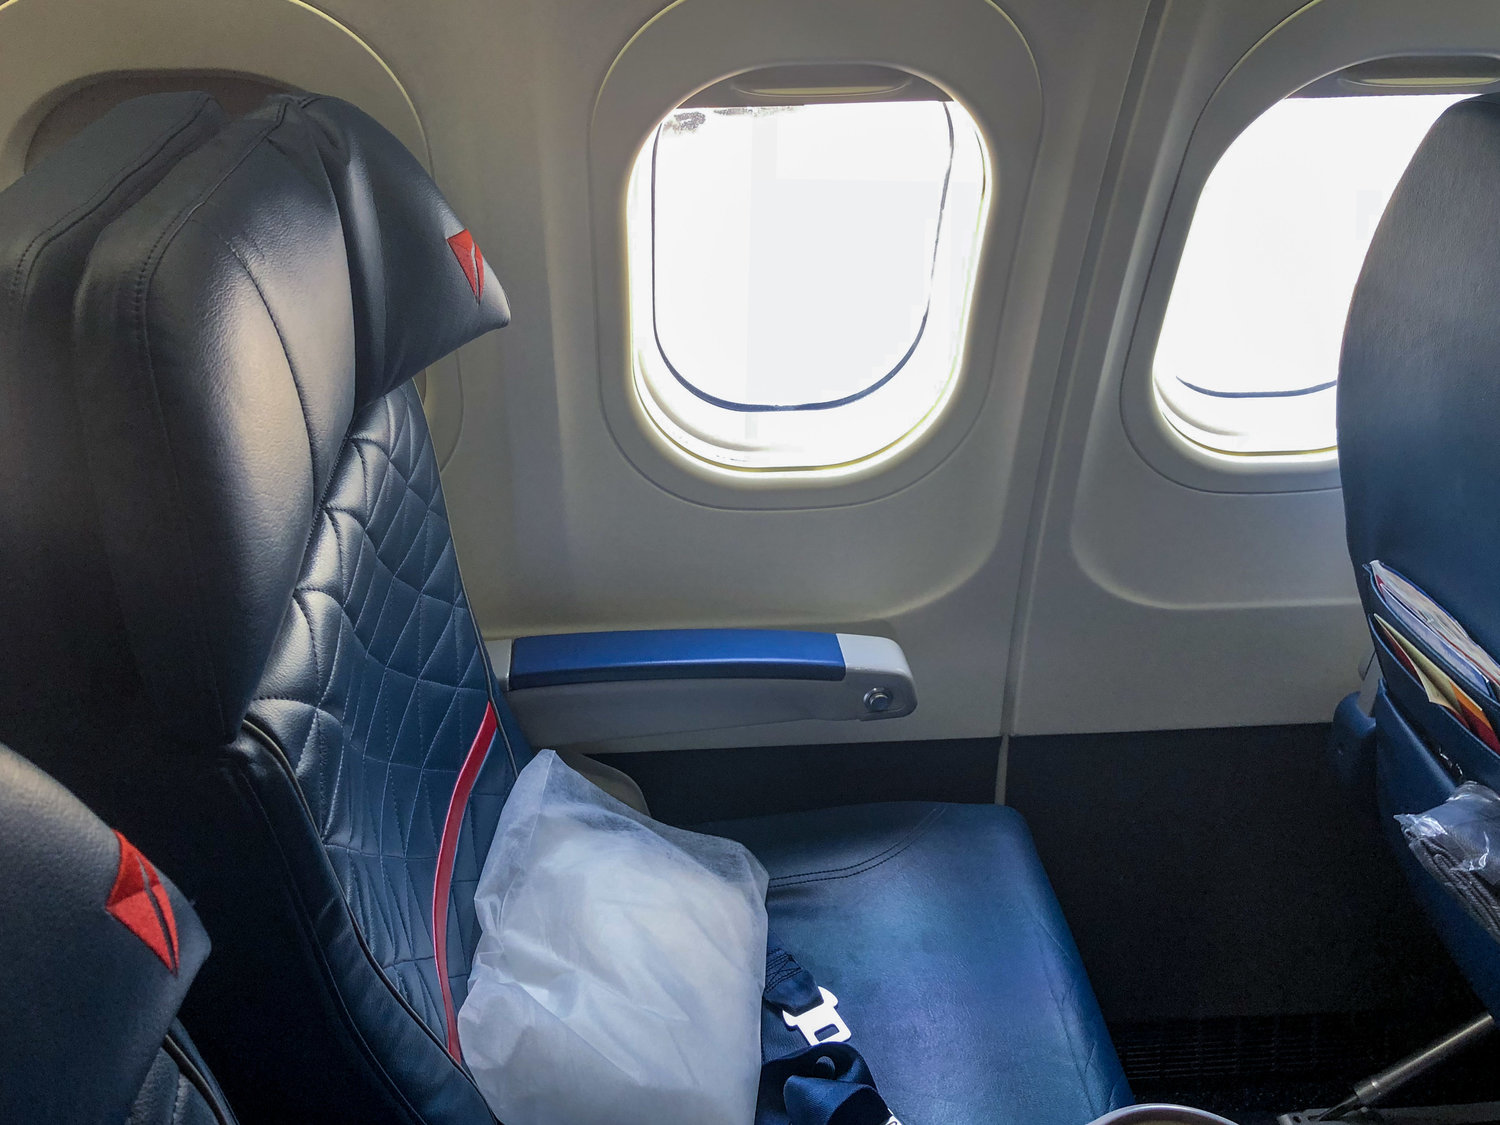 Trip Report: Delta Air Lines First Class DL2593 - JFK-TPA (New York to